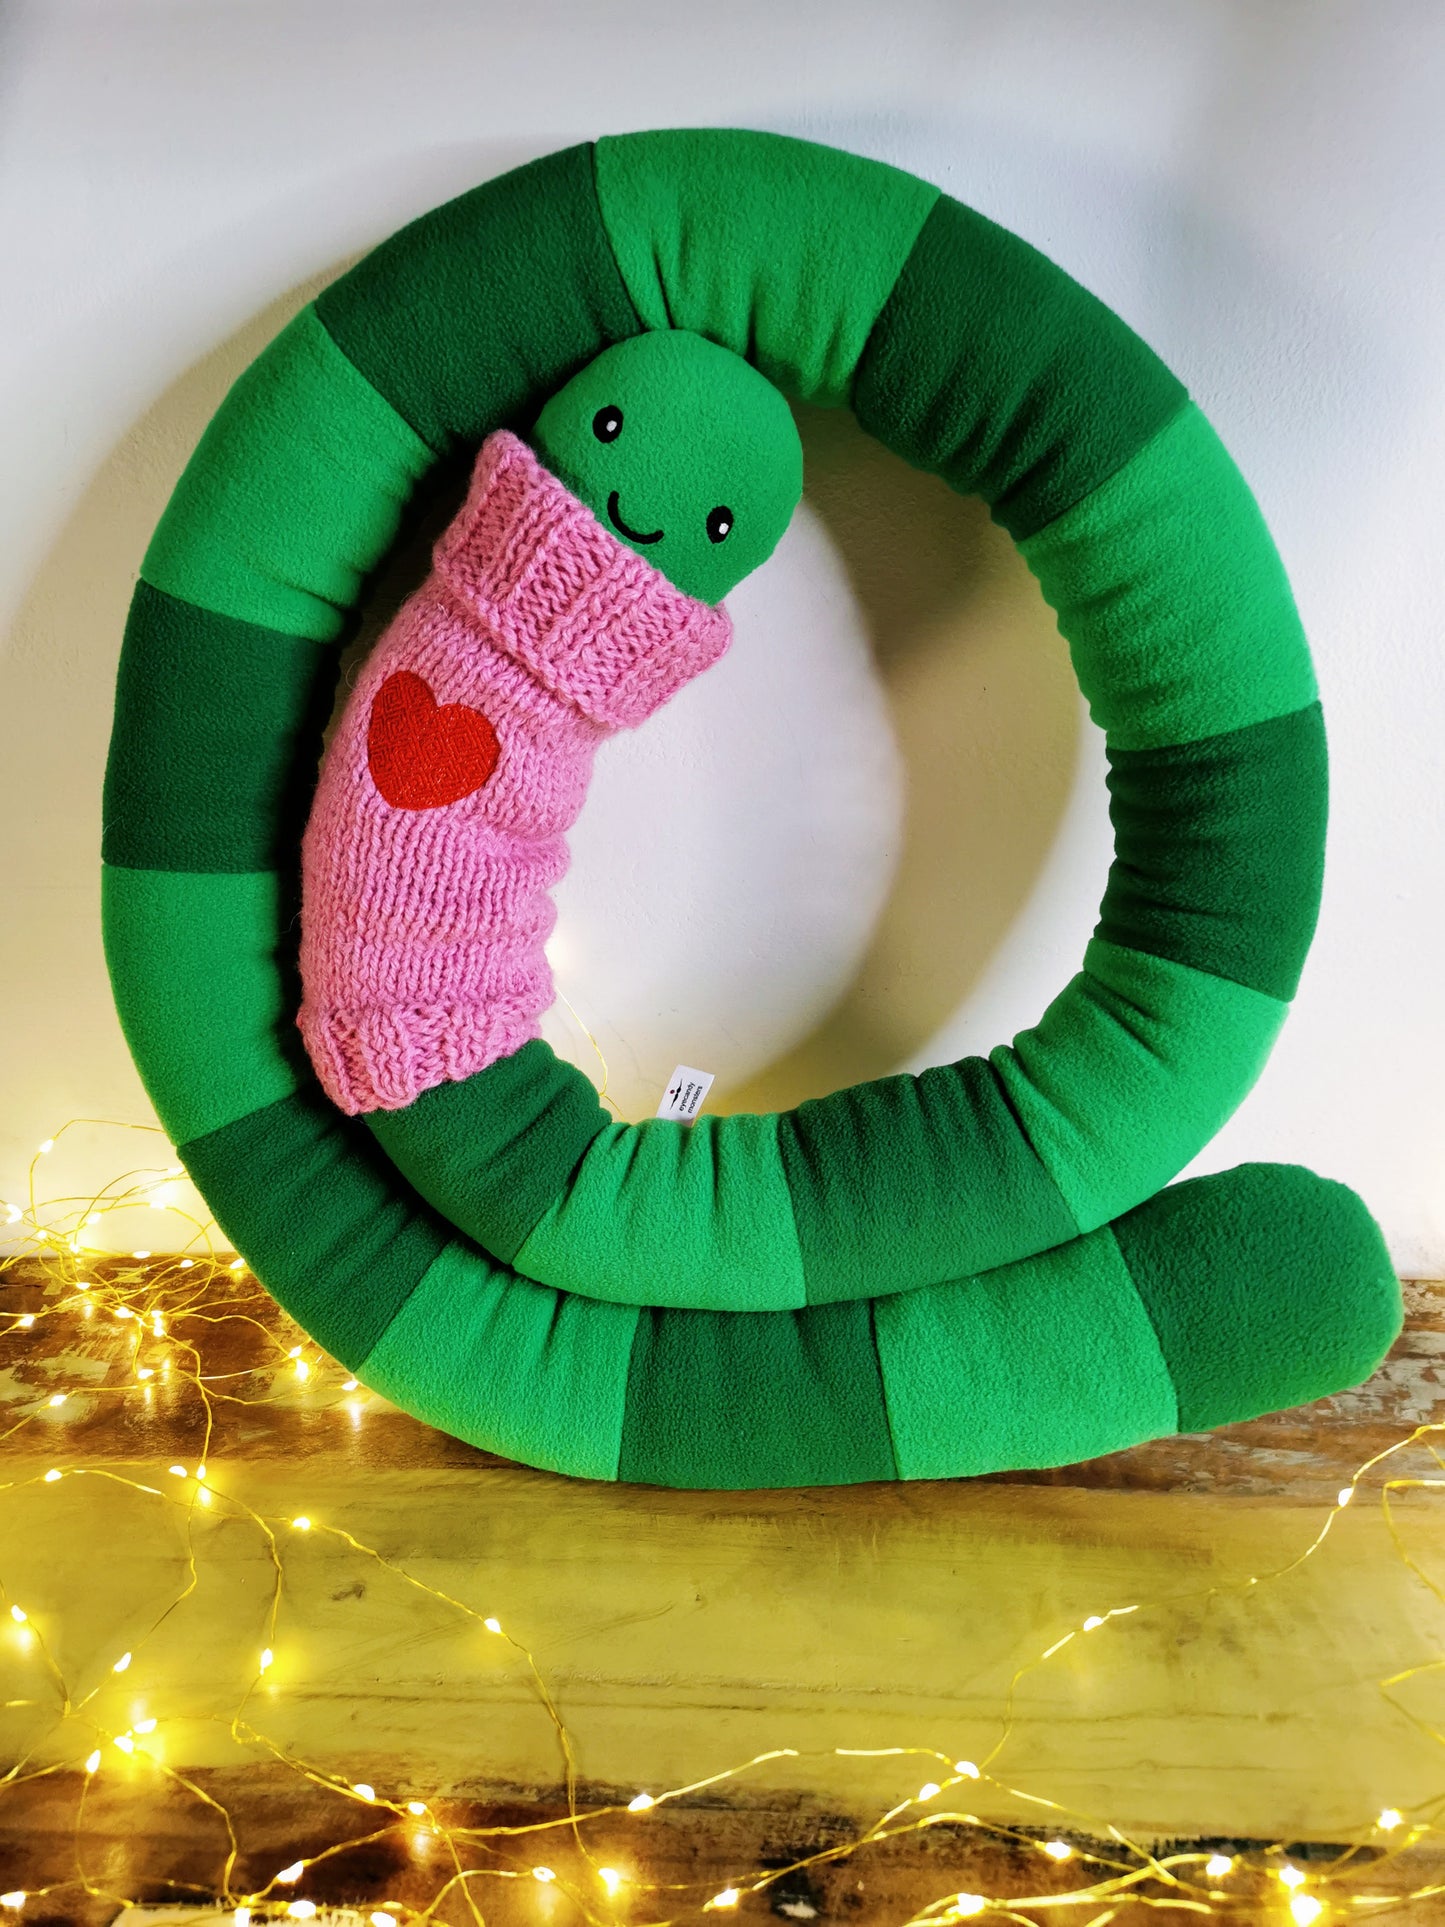 Cozy 200cm Giant Worm Plush: Perfect for Book Lovers!